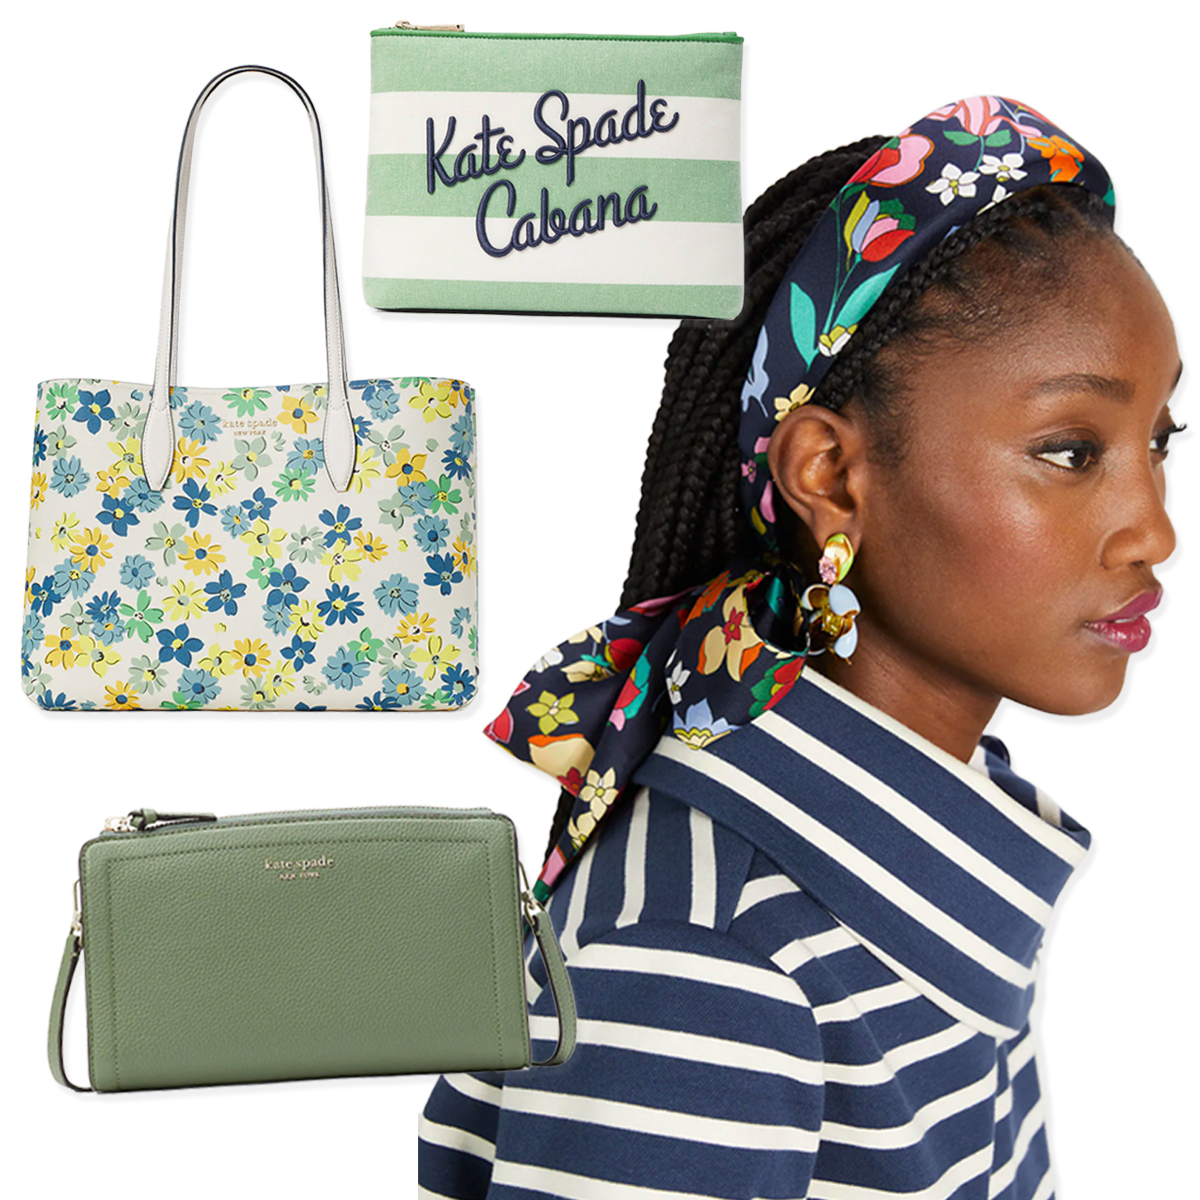 Pair Kate Spade Flower Jacquard handbags with your go-to outfits